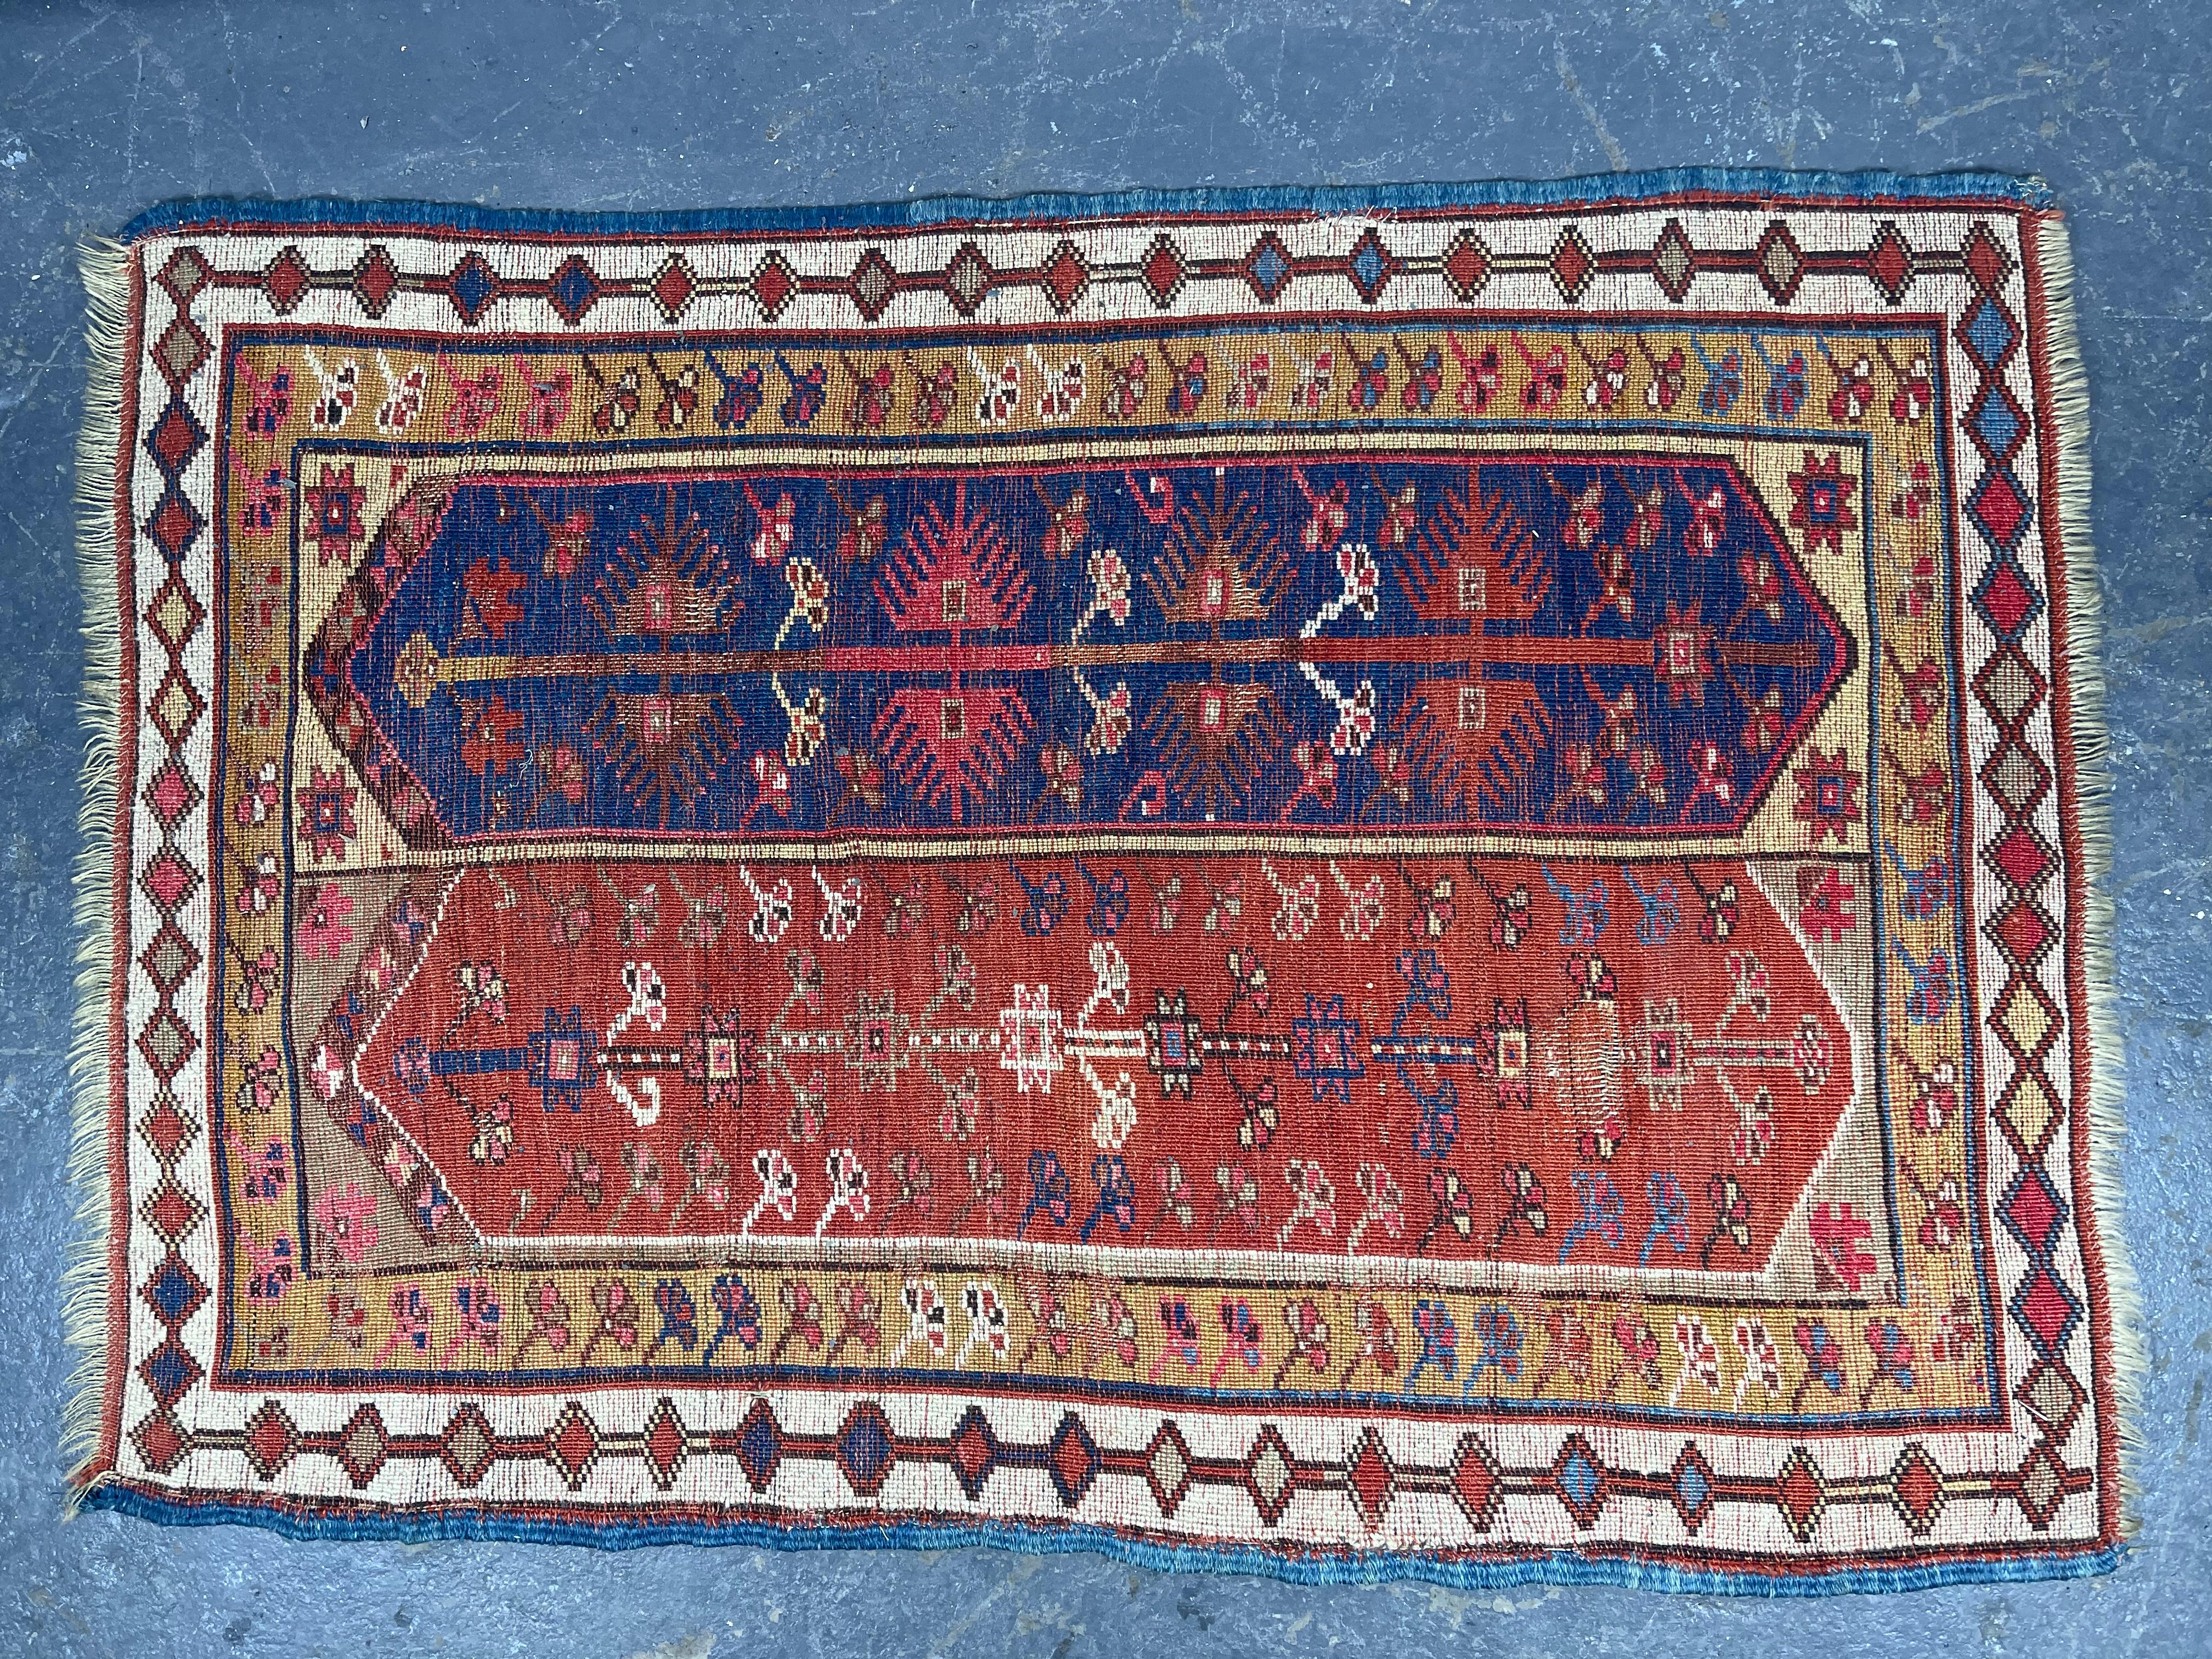 Makri Rug, Southwest Anatolia, late 19th century, two elongated rectangular panels each inset with four radiating medallions in navy and royal blue, red, gold, black, red-brown, and blue-green, gold geometric motif border, (slight wear spot) 